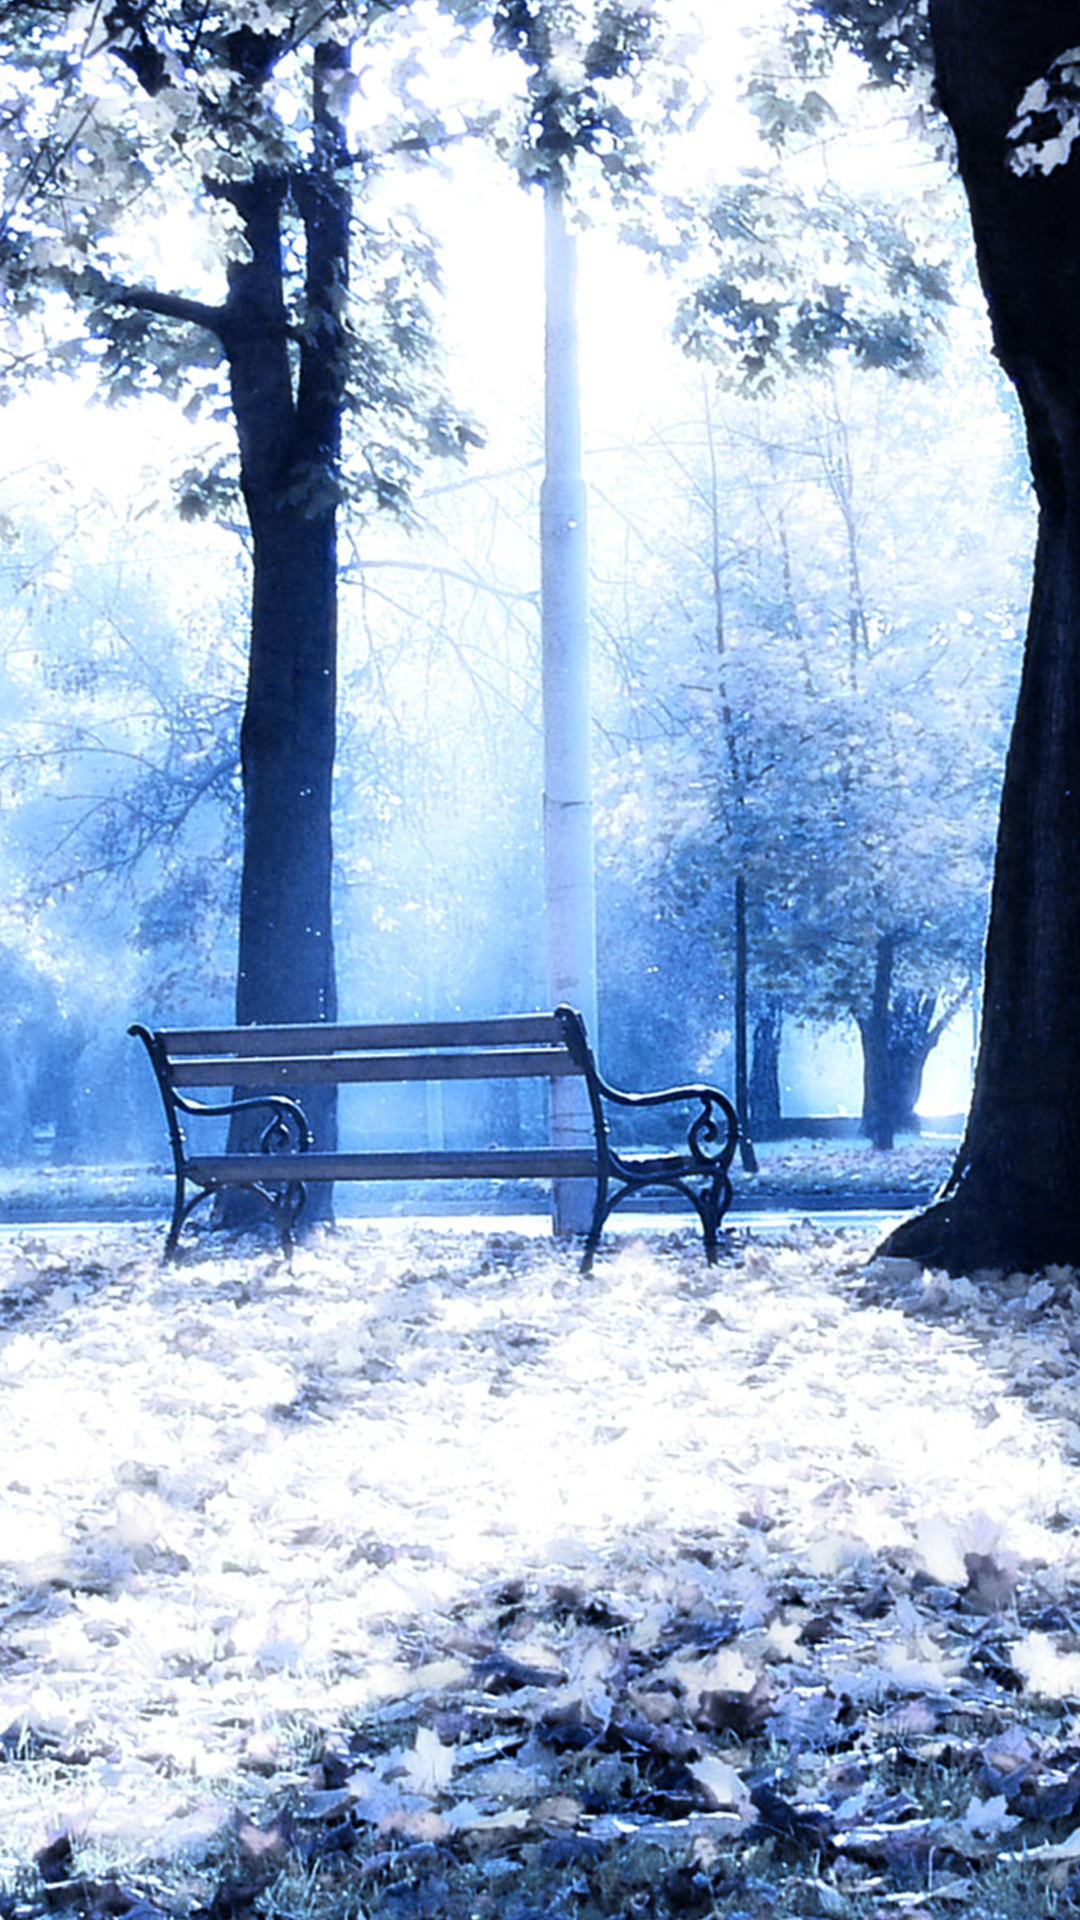 nature wallpaper hd for mobile free download,natural landscape,nature,winter,snow,bench